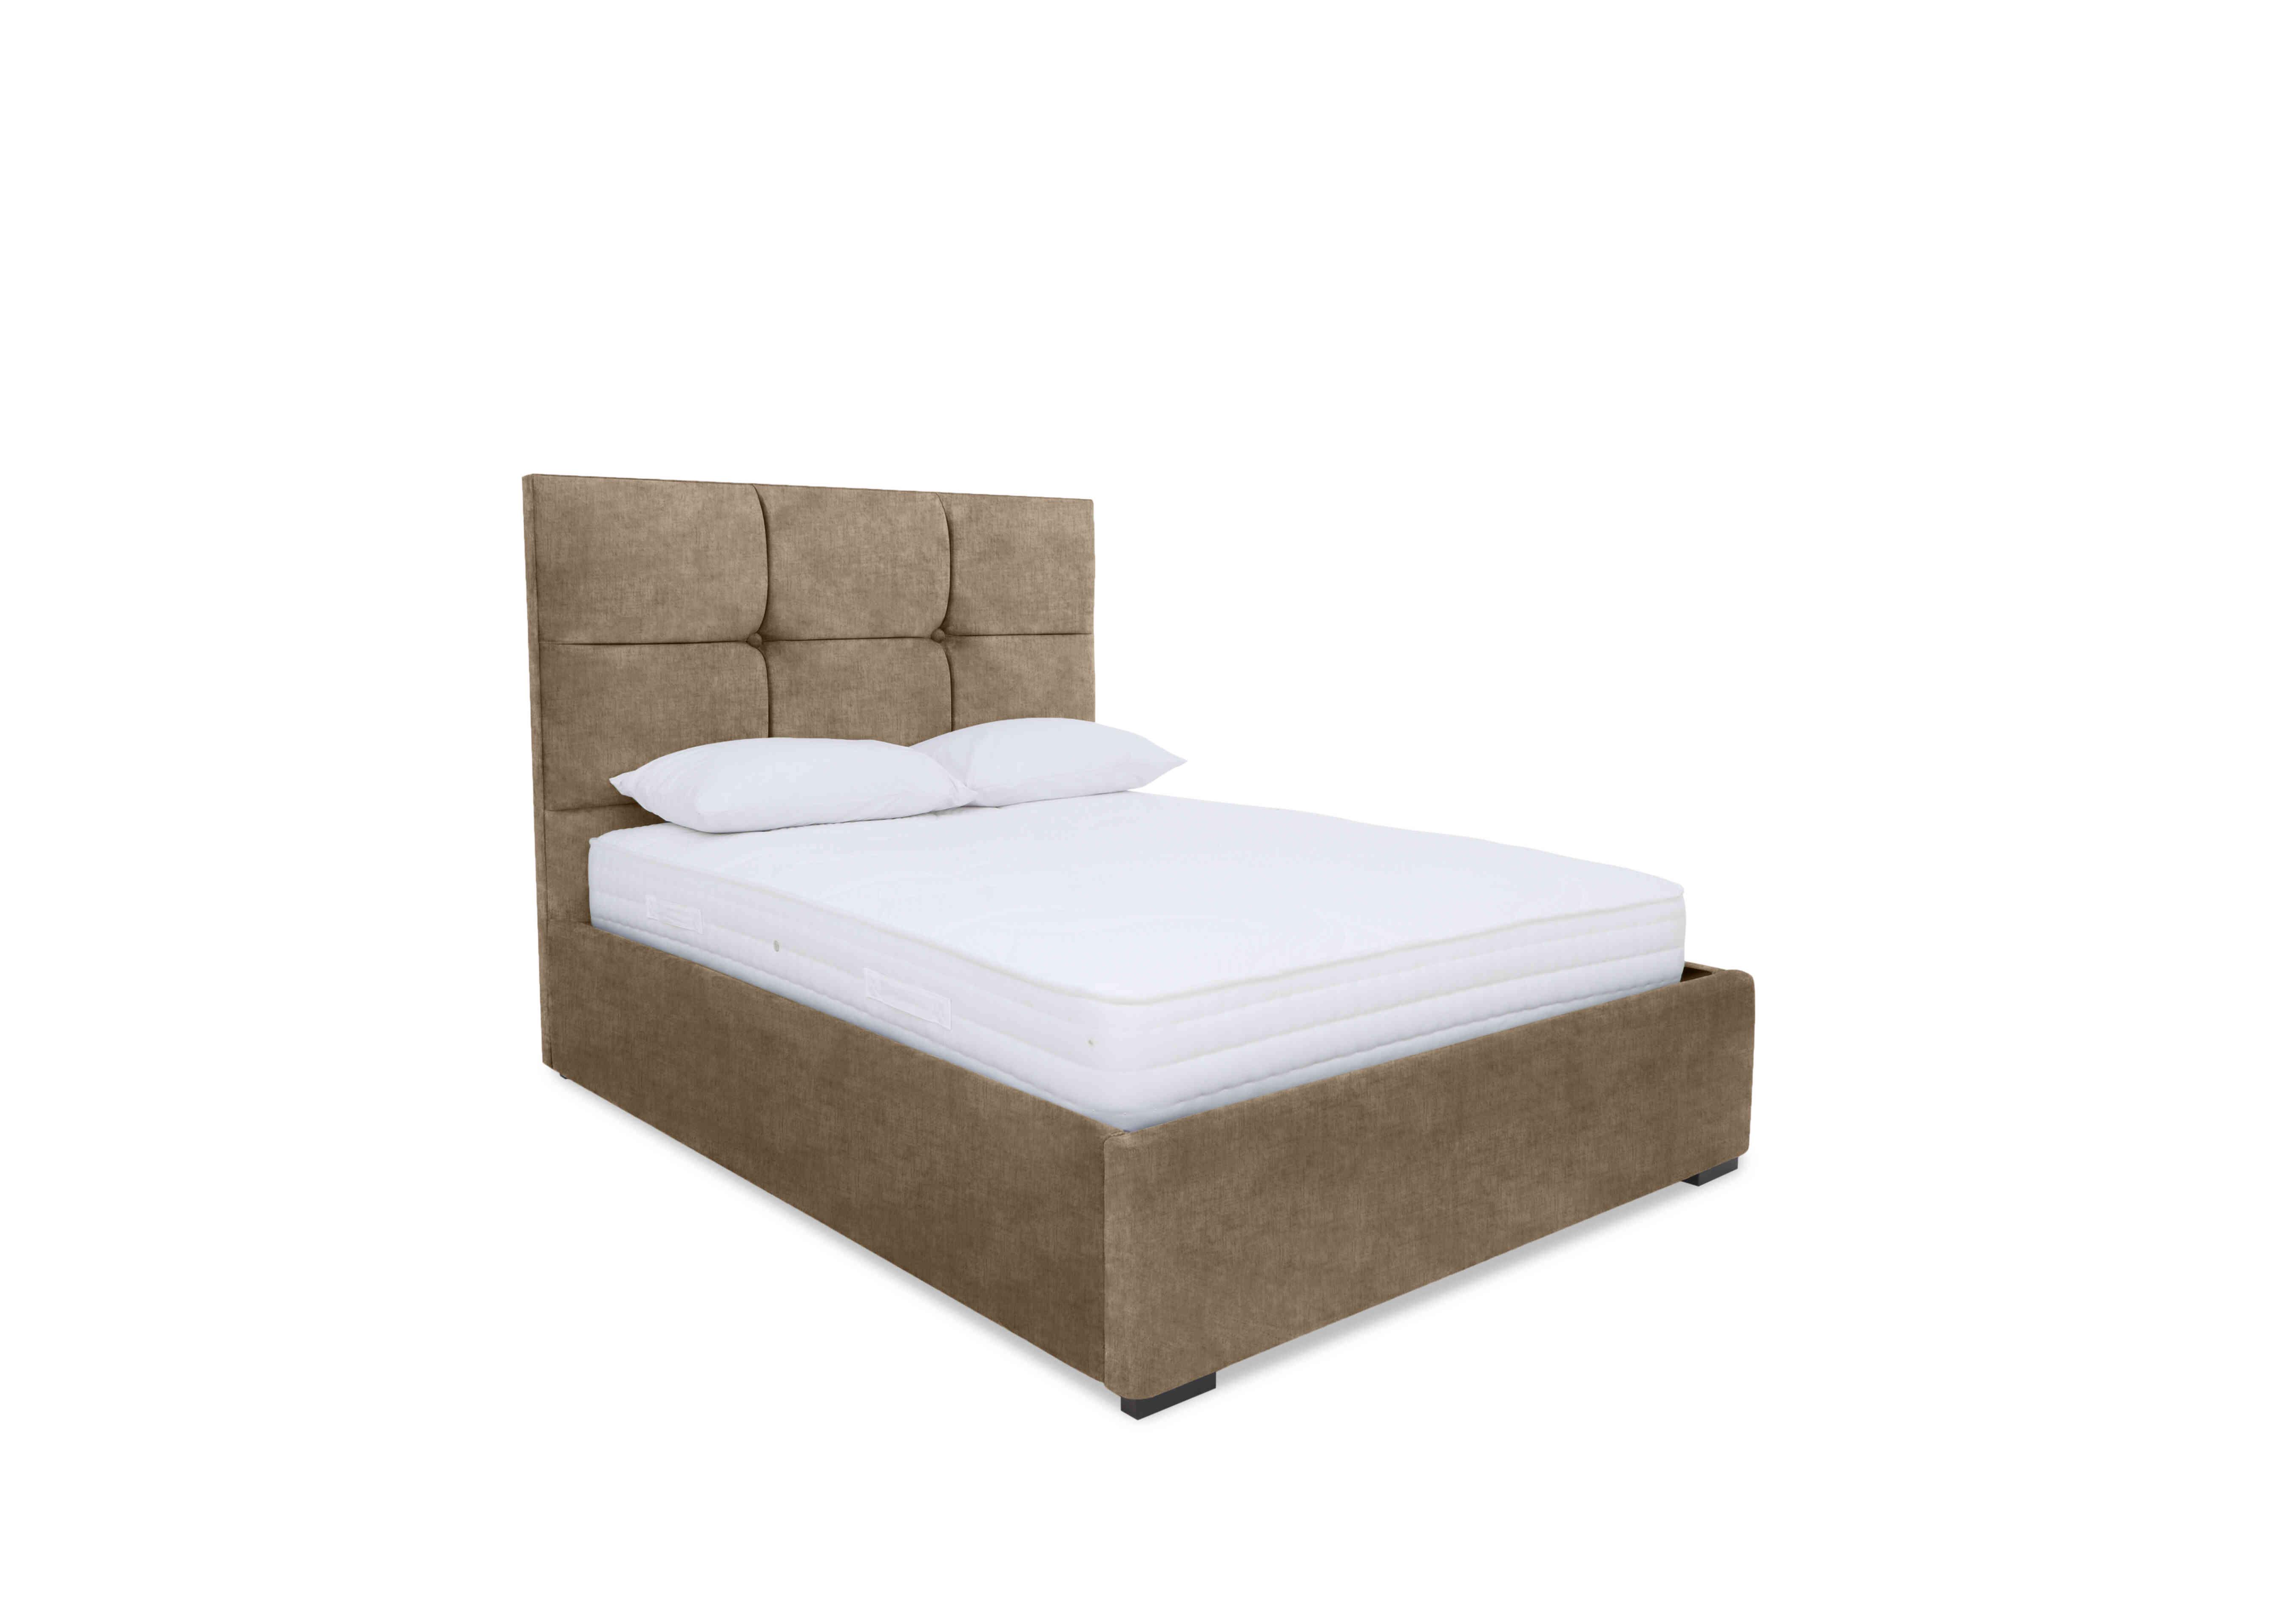 Rubix Ottoman Bed Frame in Lace Caramel on Furniture Village